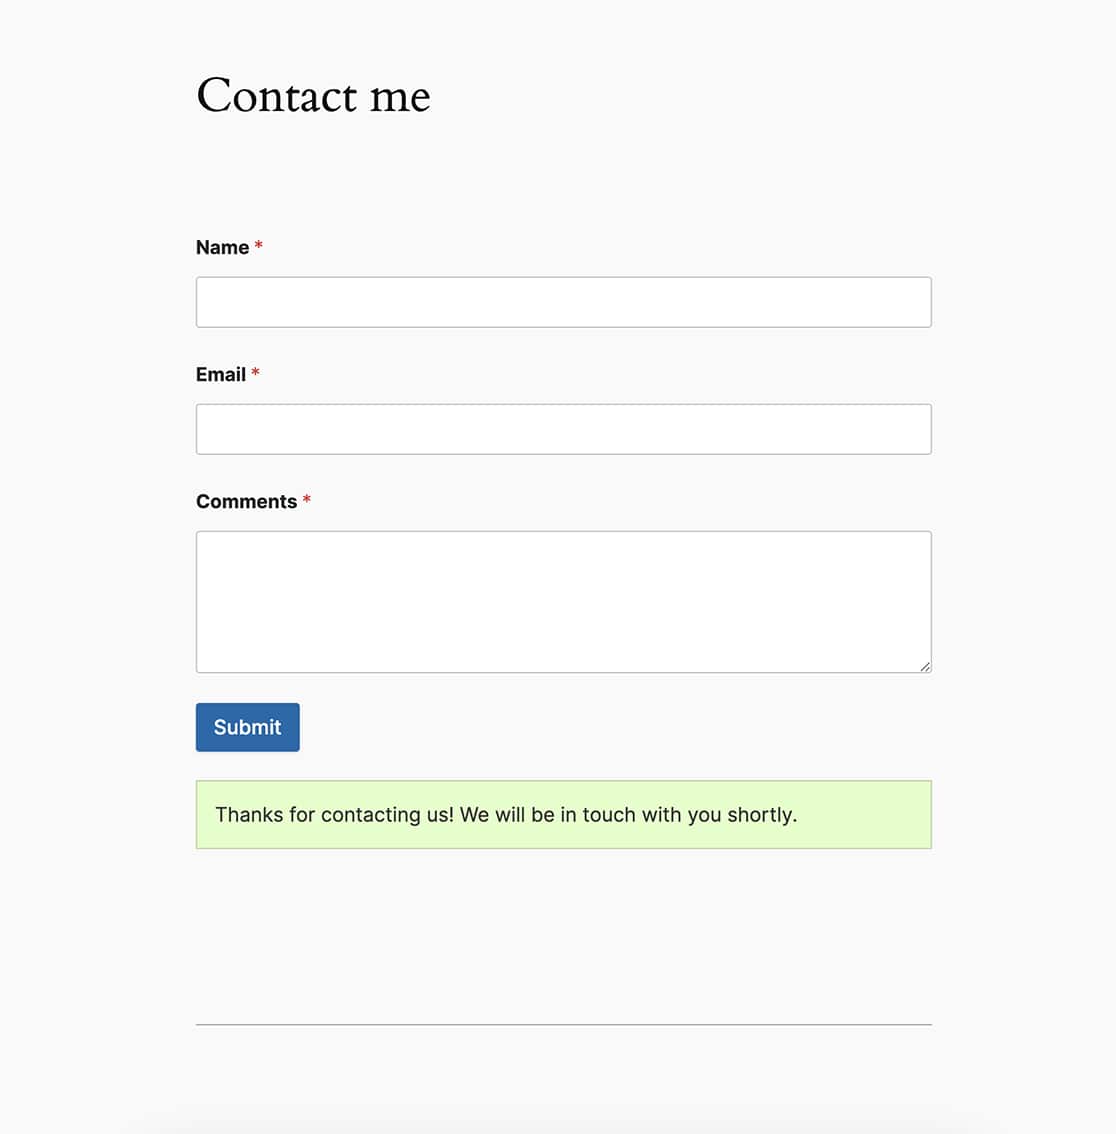 Now you can easily display confirmation and form on the same page after the form submits.